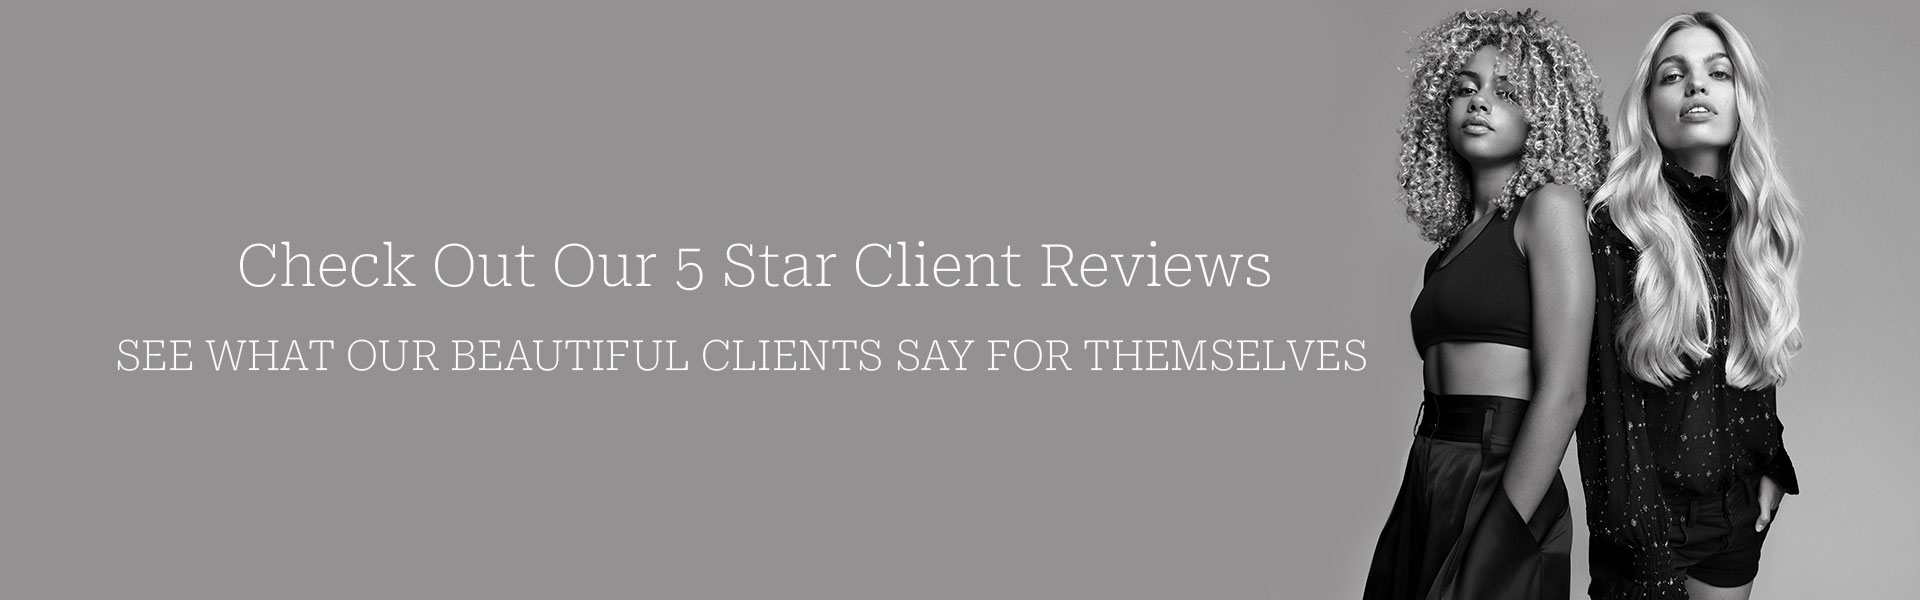 Check Out Our 5 Star Client Reviews 1